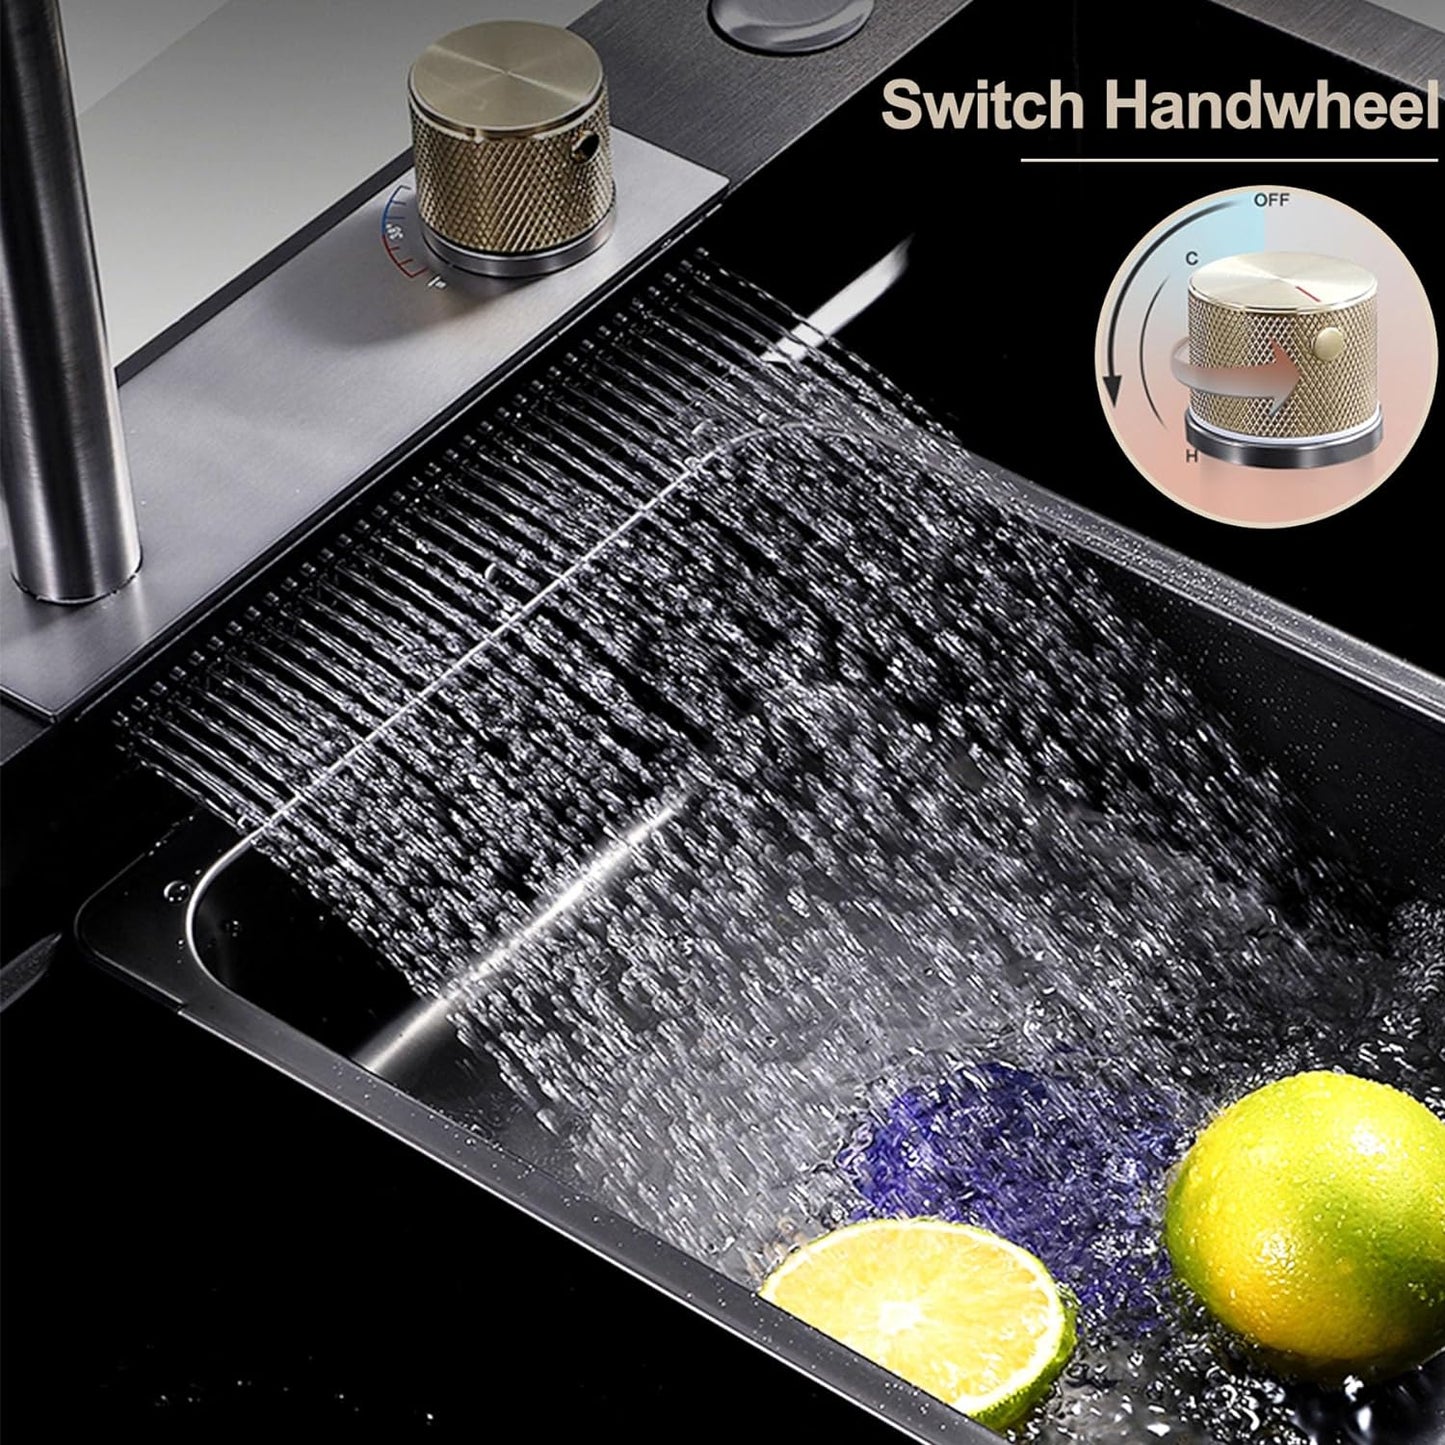 Smart Kitchen Sink & Smart Touch On Kitchen Faucet, waterfall multifunction, Anti-Scratch 304 Stainless Steel, 3 in 1 Accessories, 3 Modes Pull Down Sprayer, Smart Touch Sensor Activated, Auto ON/Off. (KSF-100)